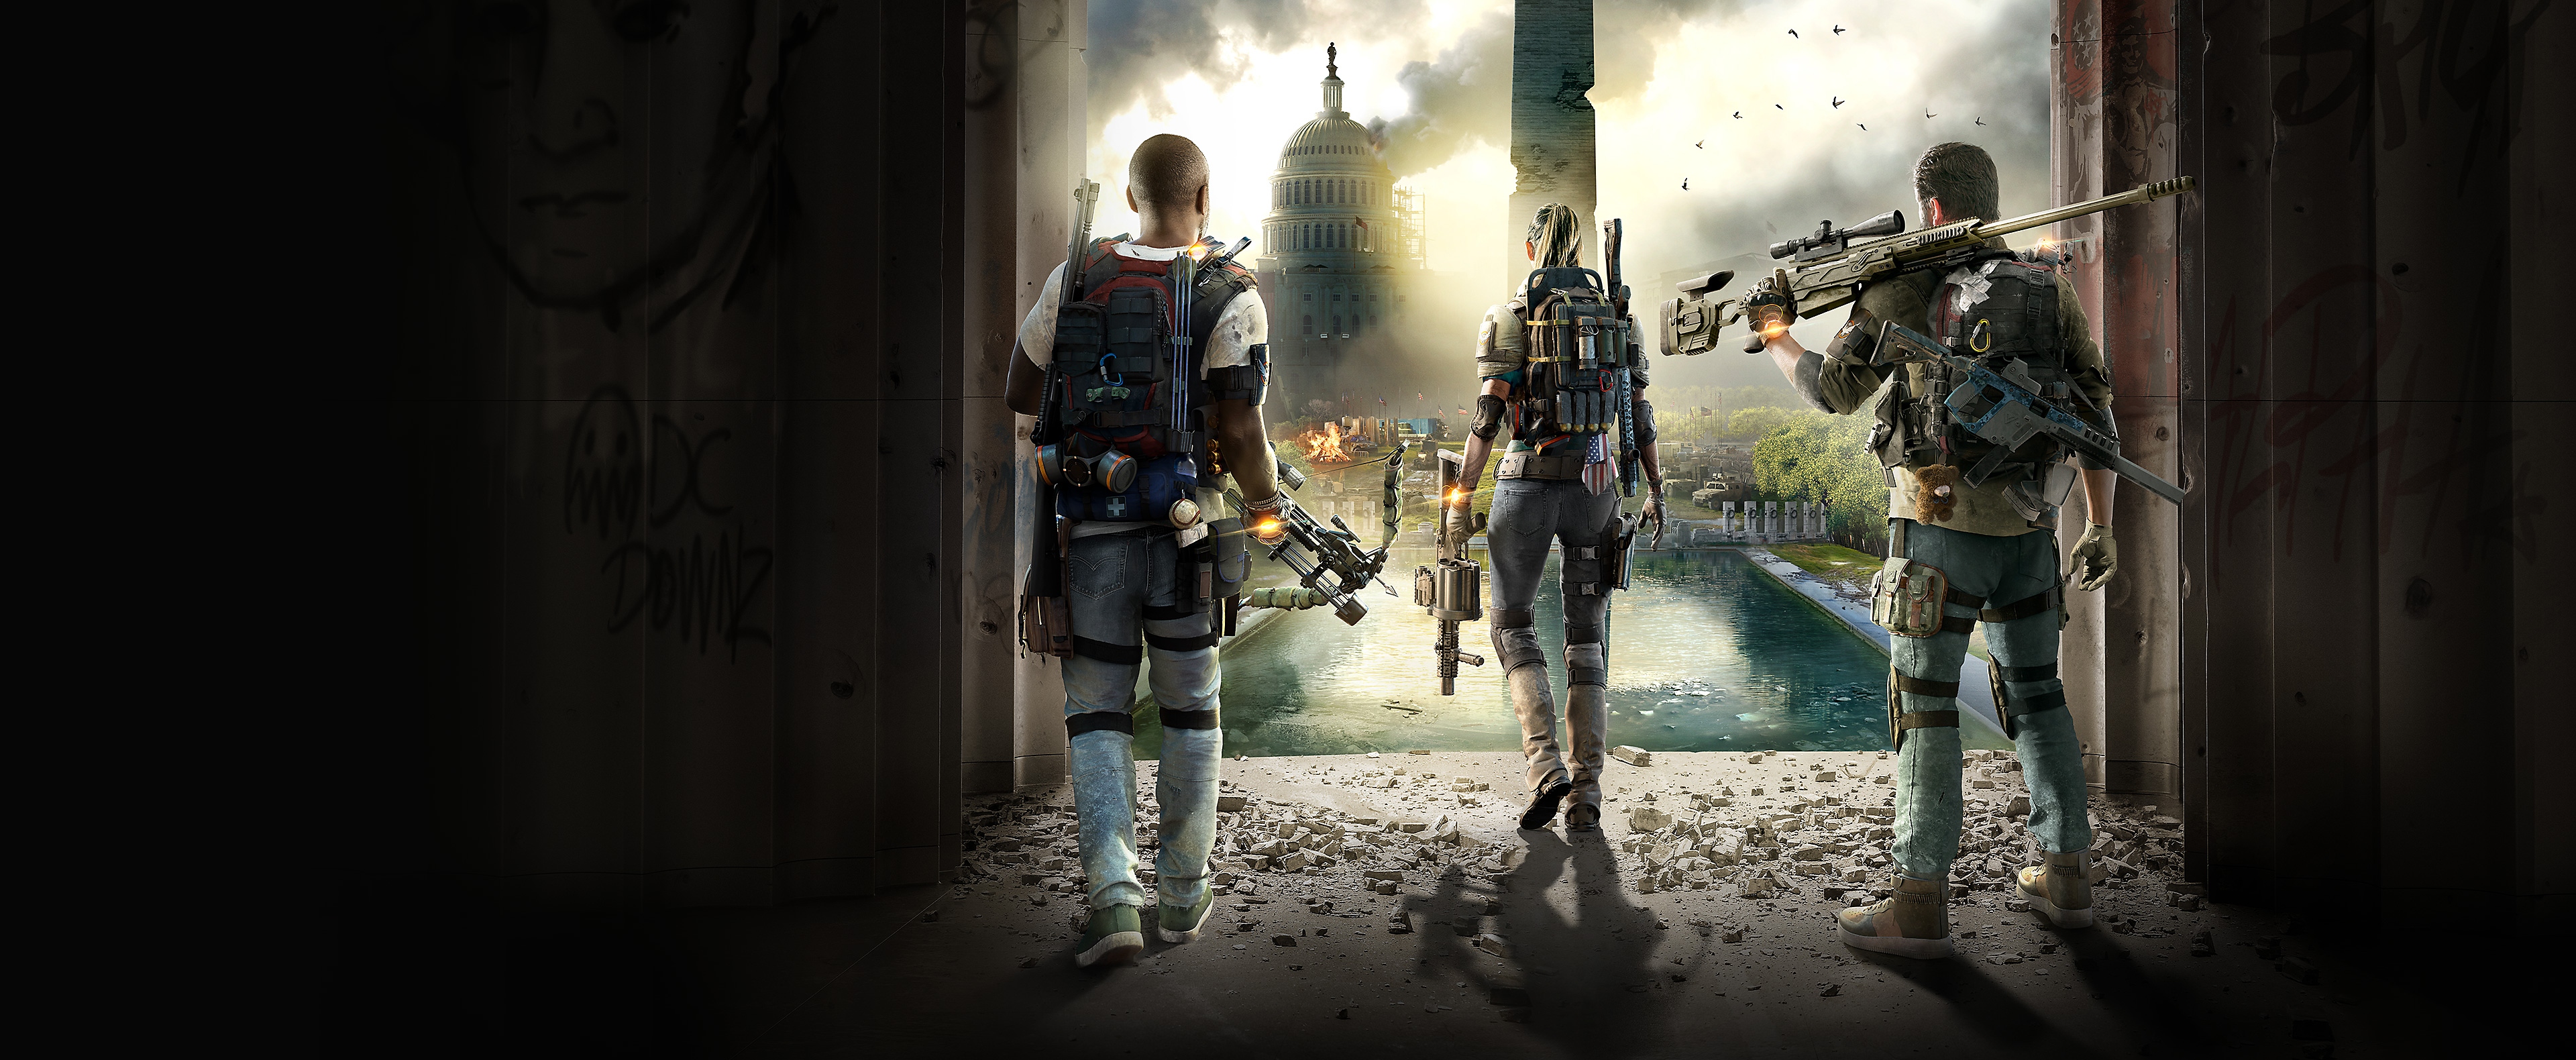 Tom Clancy‘s The Division 2